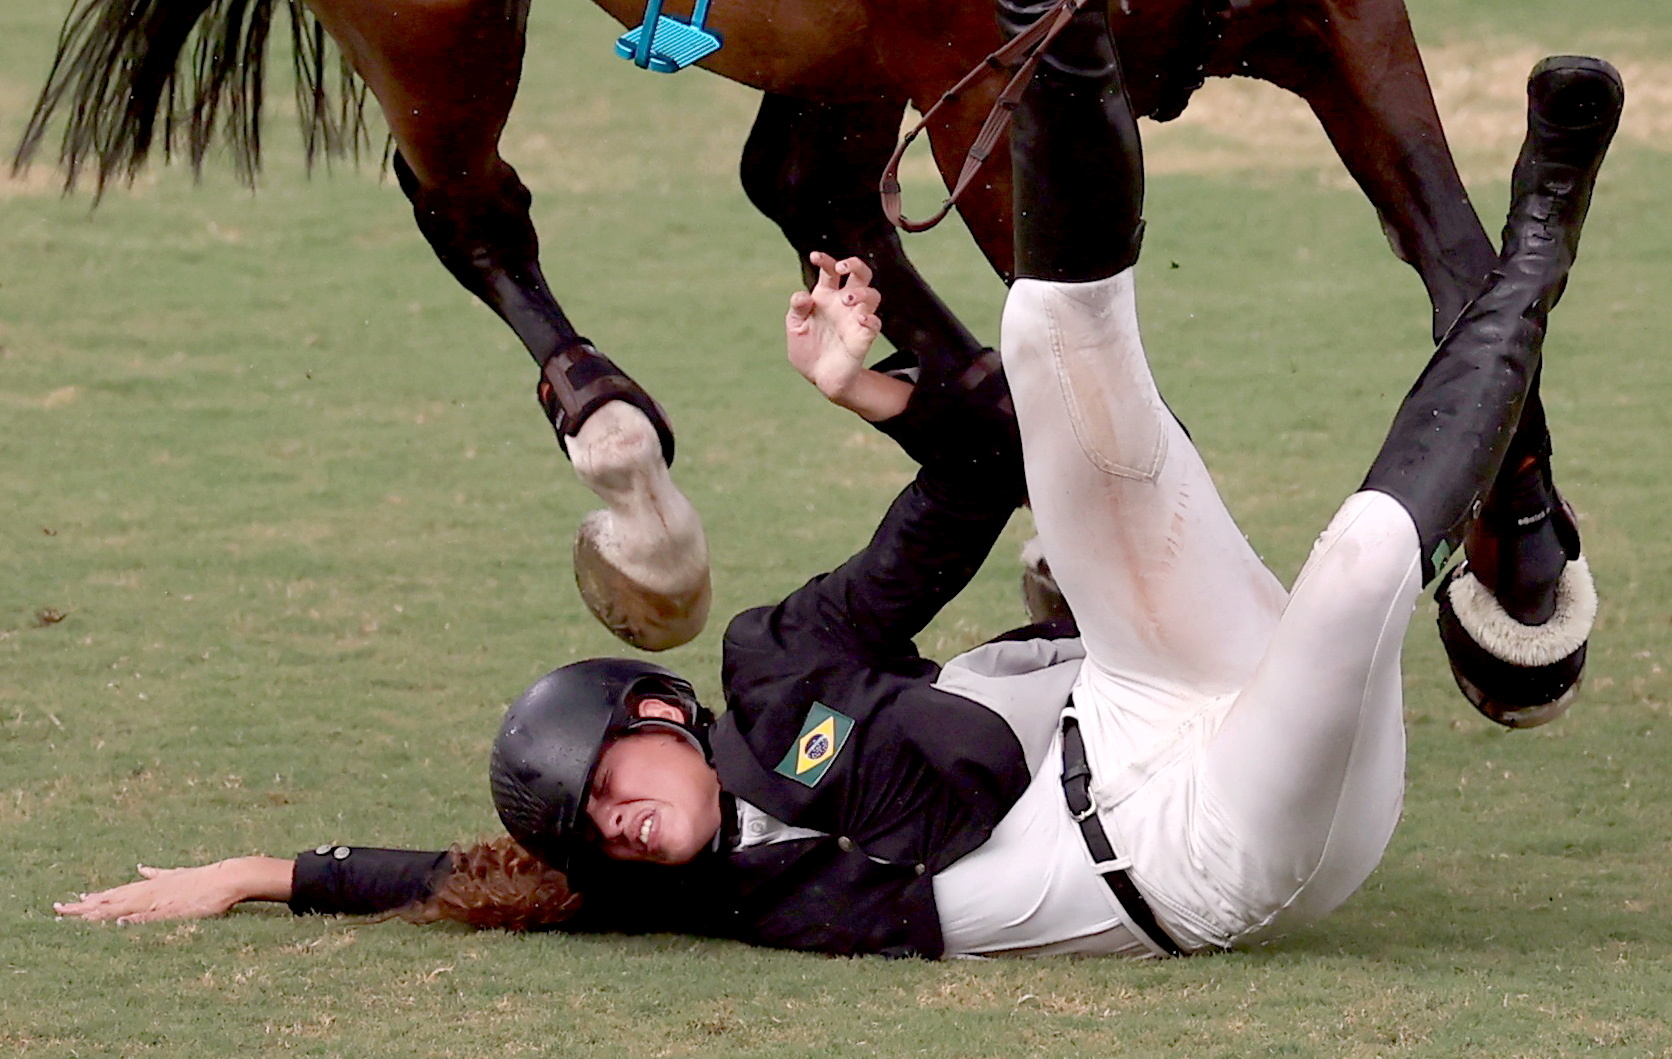 Tokyo 2020 Olympics - Modern Pentathlon - Women's Riding - Tokyo Stadium - Tokyo, Japan - August 6, 2021. Ieda Guimaraes of Brazil falls from her horse during the competition REUTERS/Ivan Alvarado/File Photo     TPX IMAGES OF THE DAY SEARCH "POY SPORTS" FOR THIS STORY. SEARCH "REUTERS POY" FOR ALL BEST OF 2021 PACKAGES